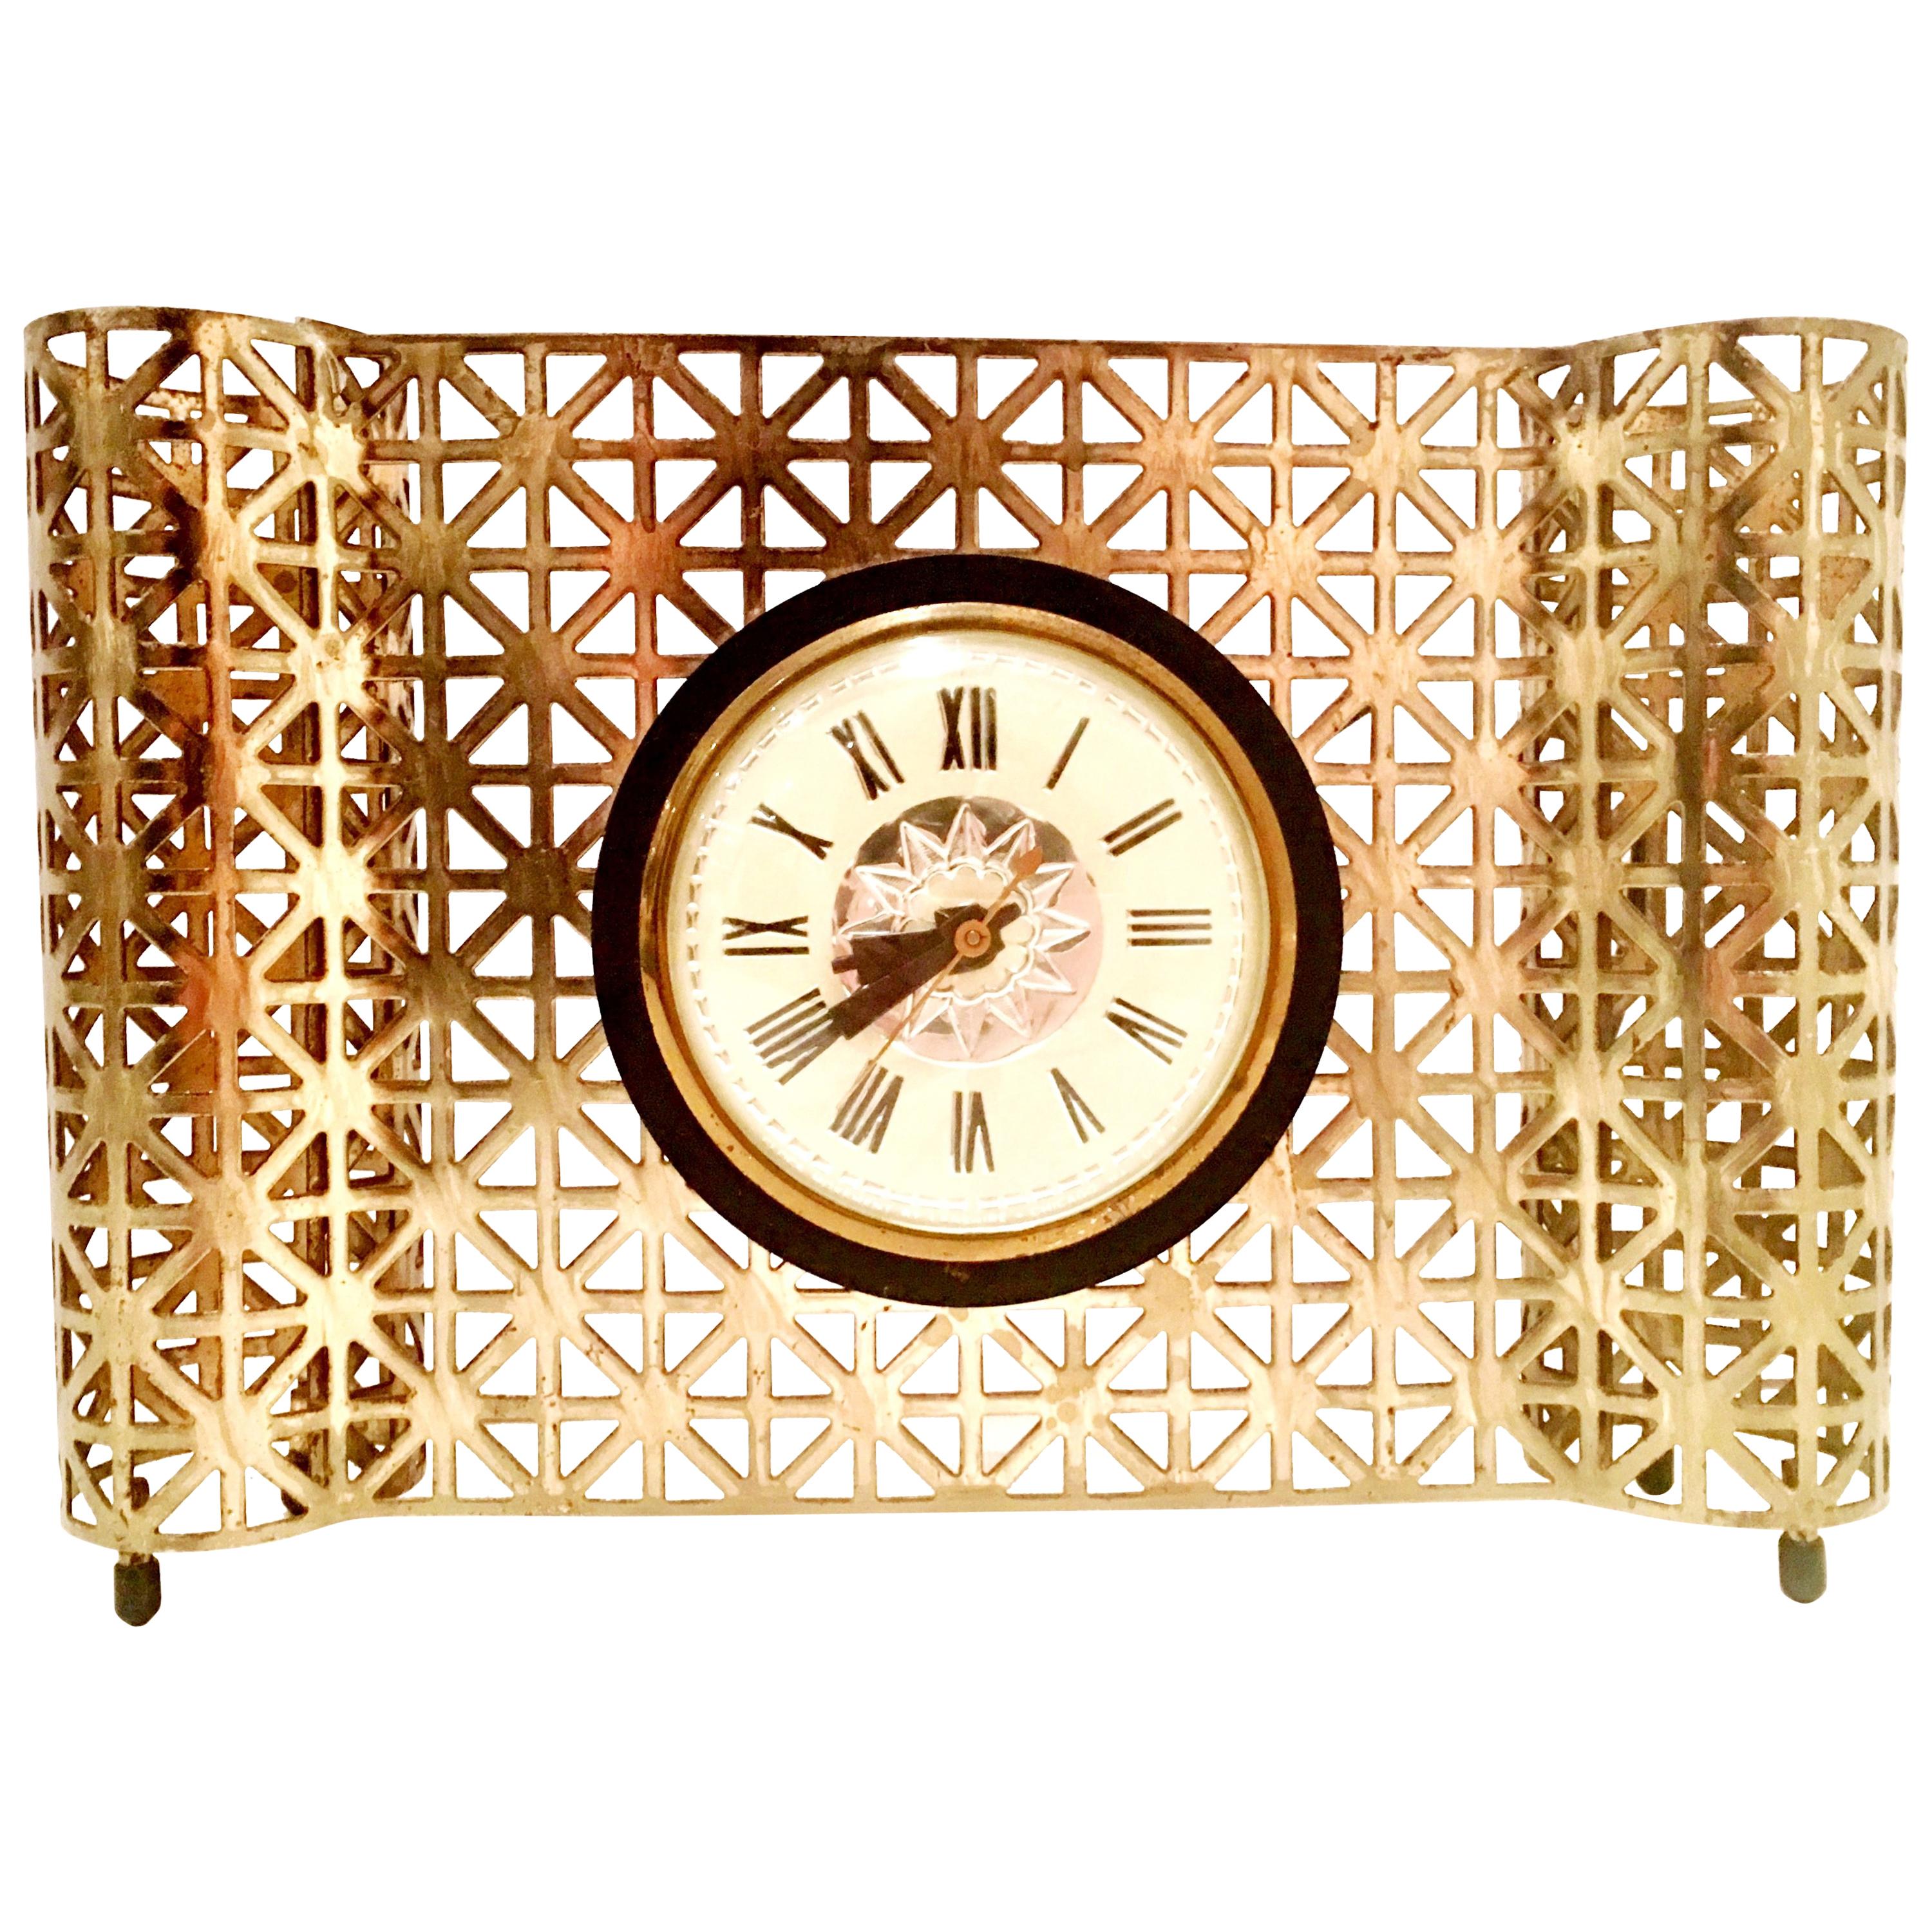 Mid-20th Century American Art Deco Gilt Brass Electrical Clock by, Bilt Rite For Sale